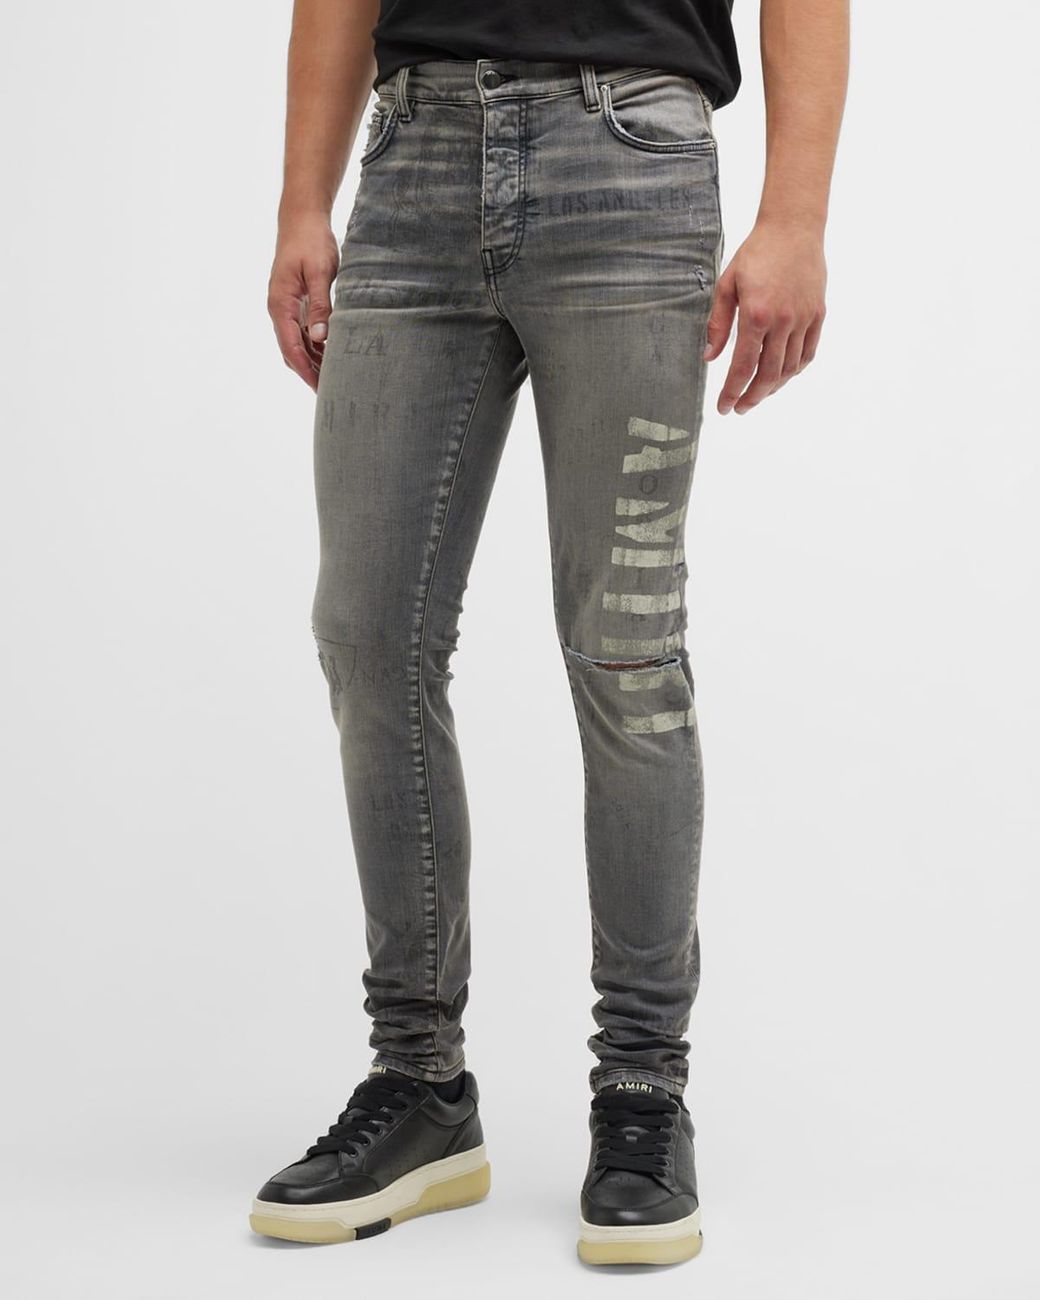 Amiri Military Stencil Jeans in for | Lyst